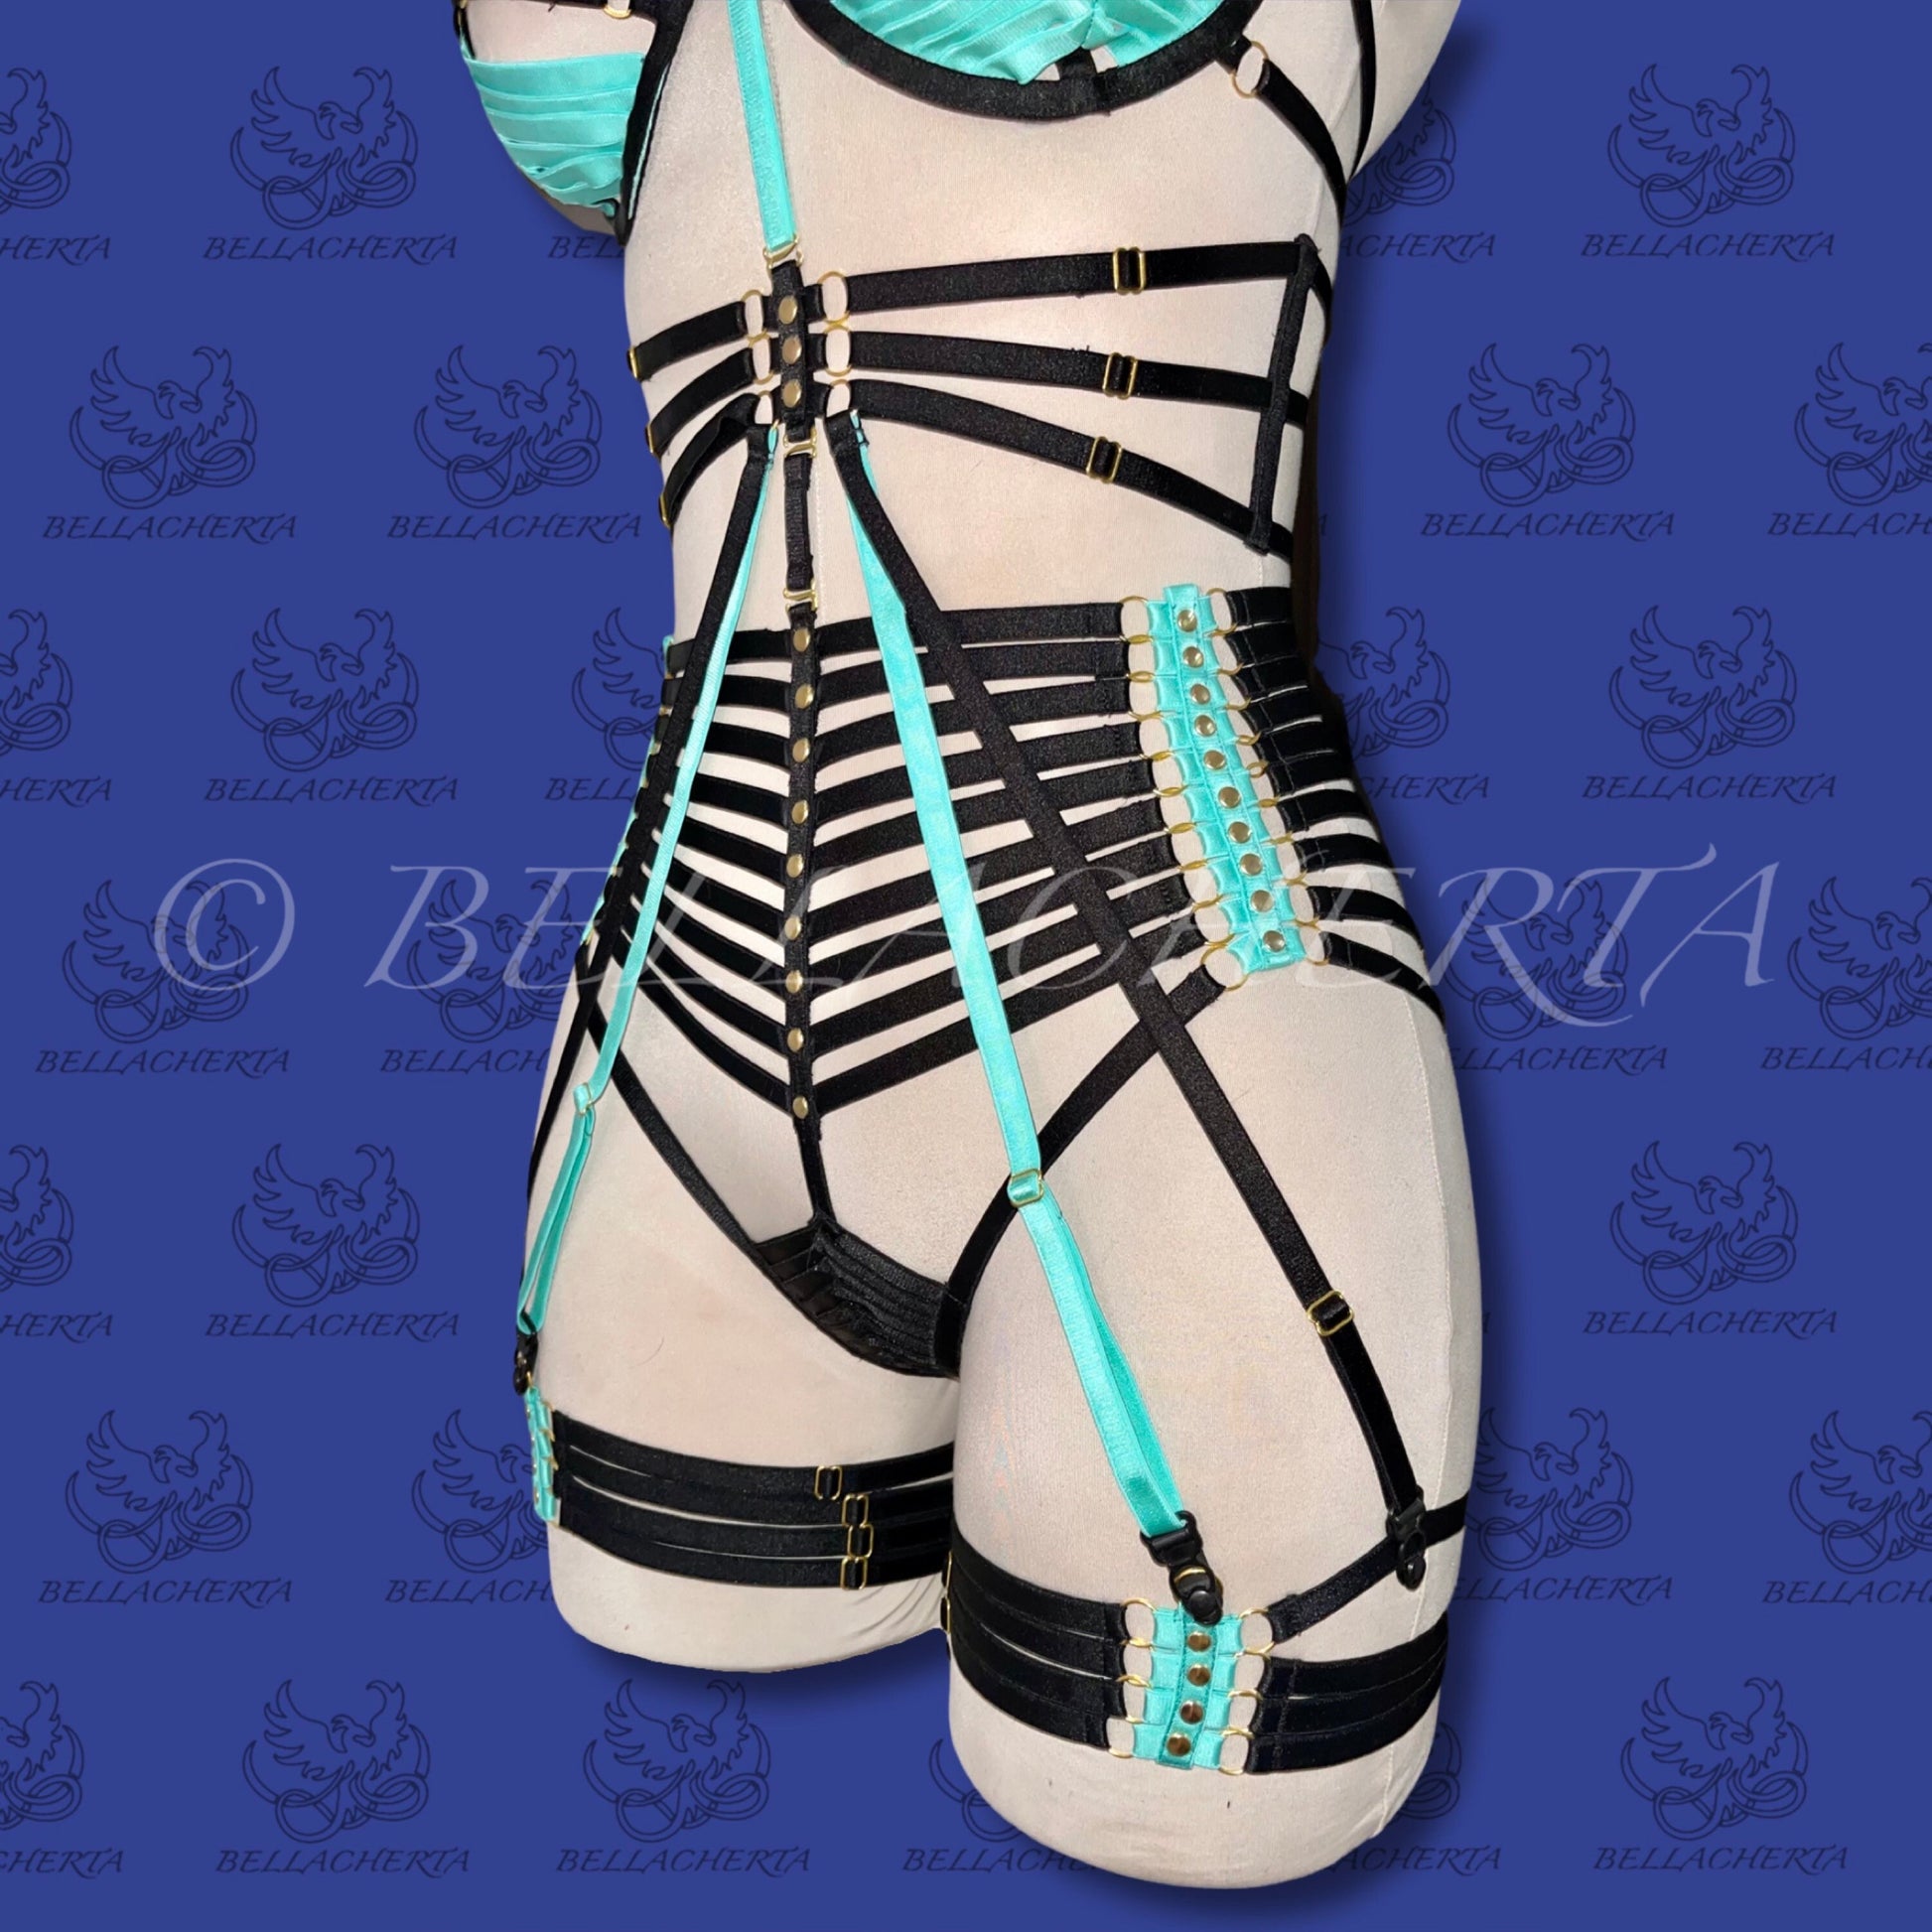 Full Body Harness Lingerie / Strappy Two-Tone Bra with Matching Choker, Panties, Decorative Shoulder Pads, Garter Belt and Garters